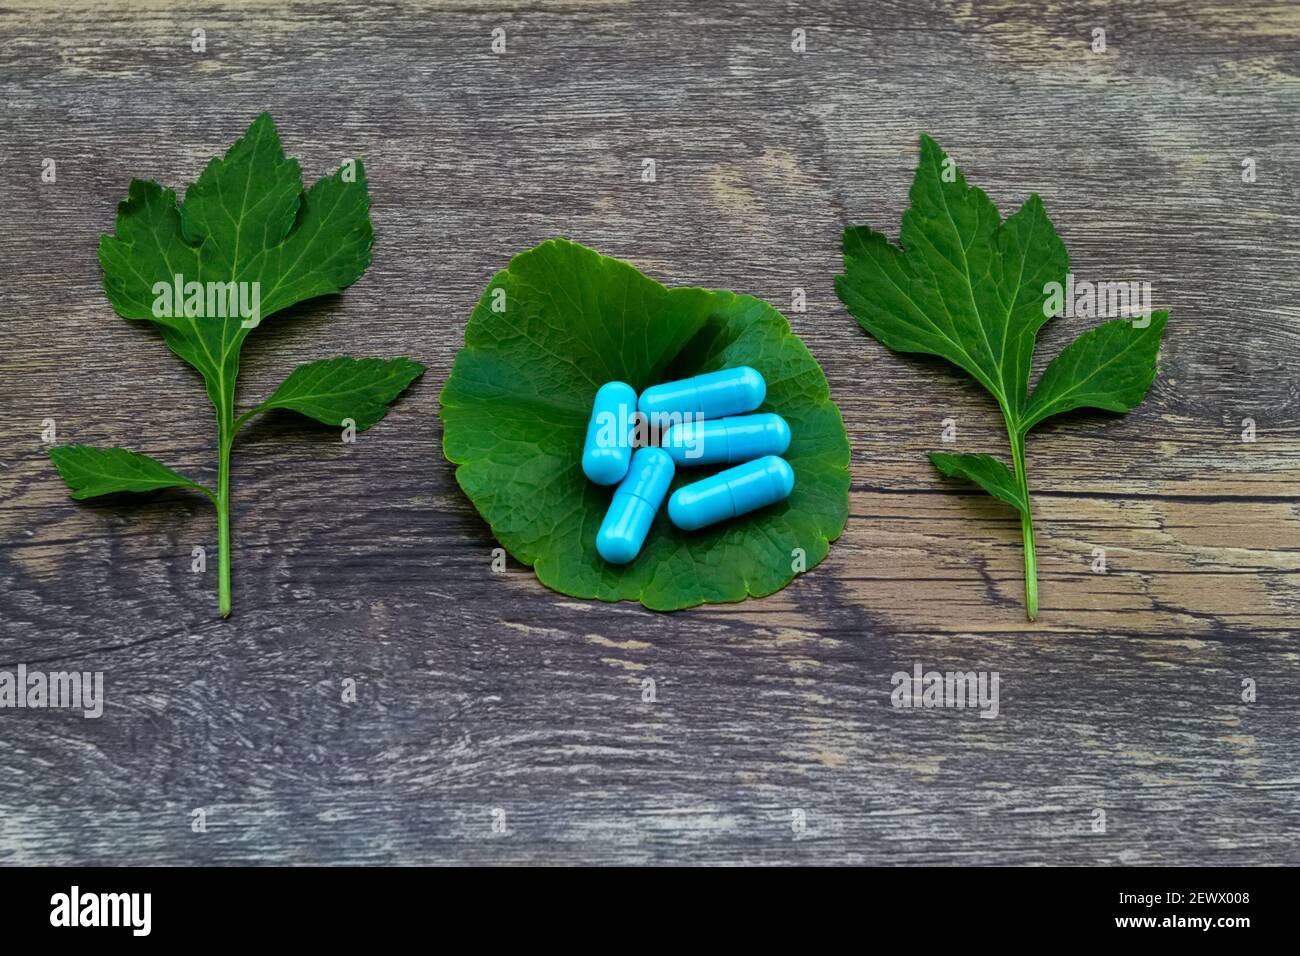 Colorful of pill and green leaf of White mugwort plant (Artemisia lactiflora) with Green Asiatic Pennywort (Centella asiatica ) on grunge wooden backg Stock Photo